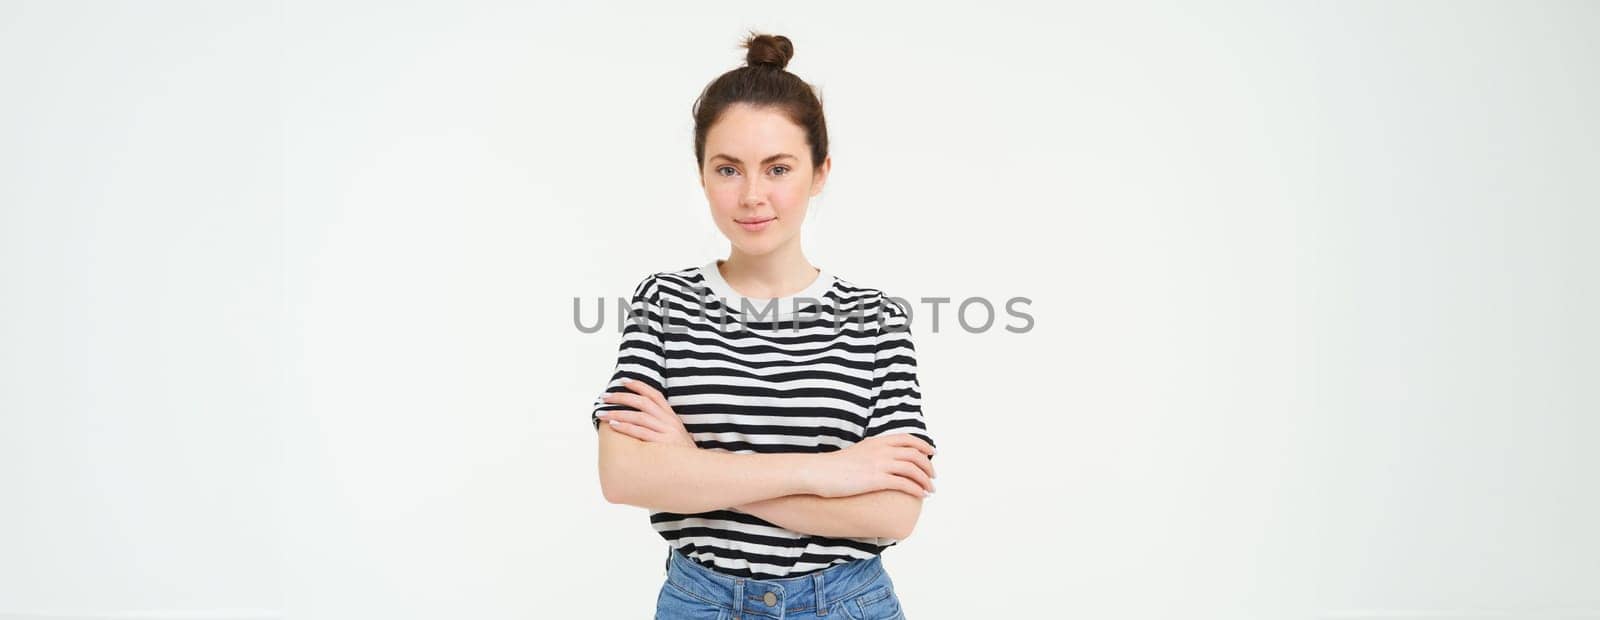 Portrait of young stylish woman, 25 years old, looking upbeat and motivated, posing for photo against white background by Benzoix